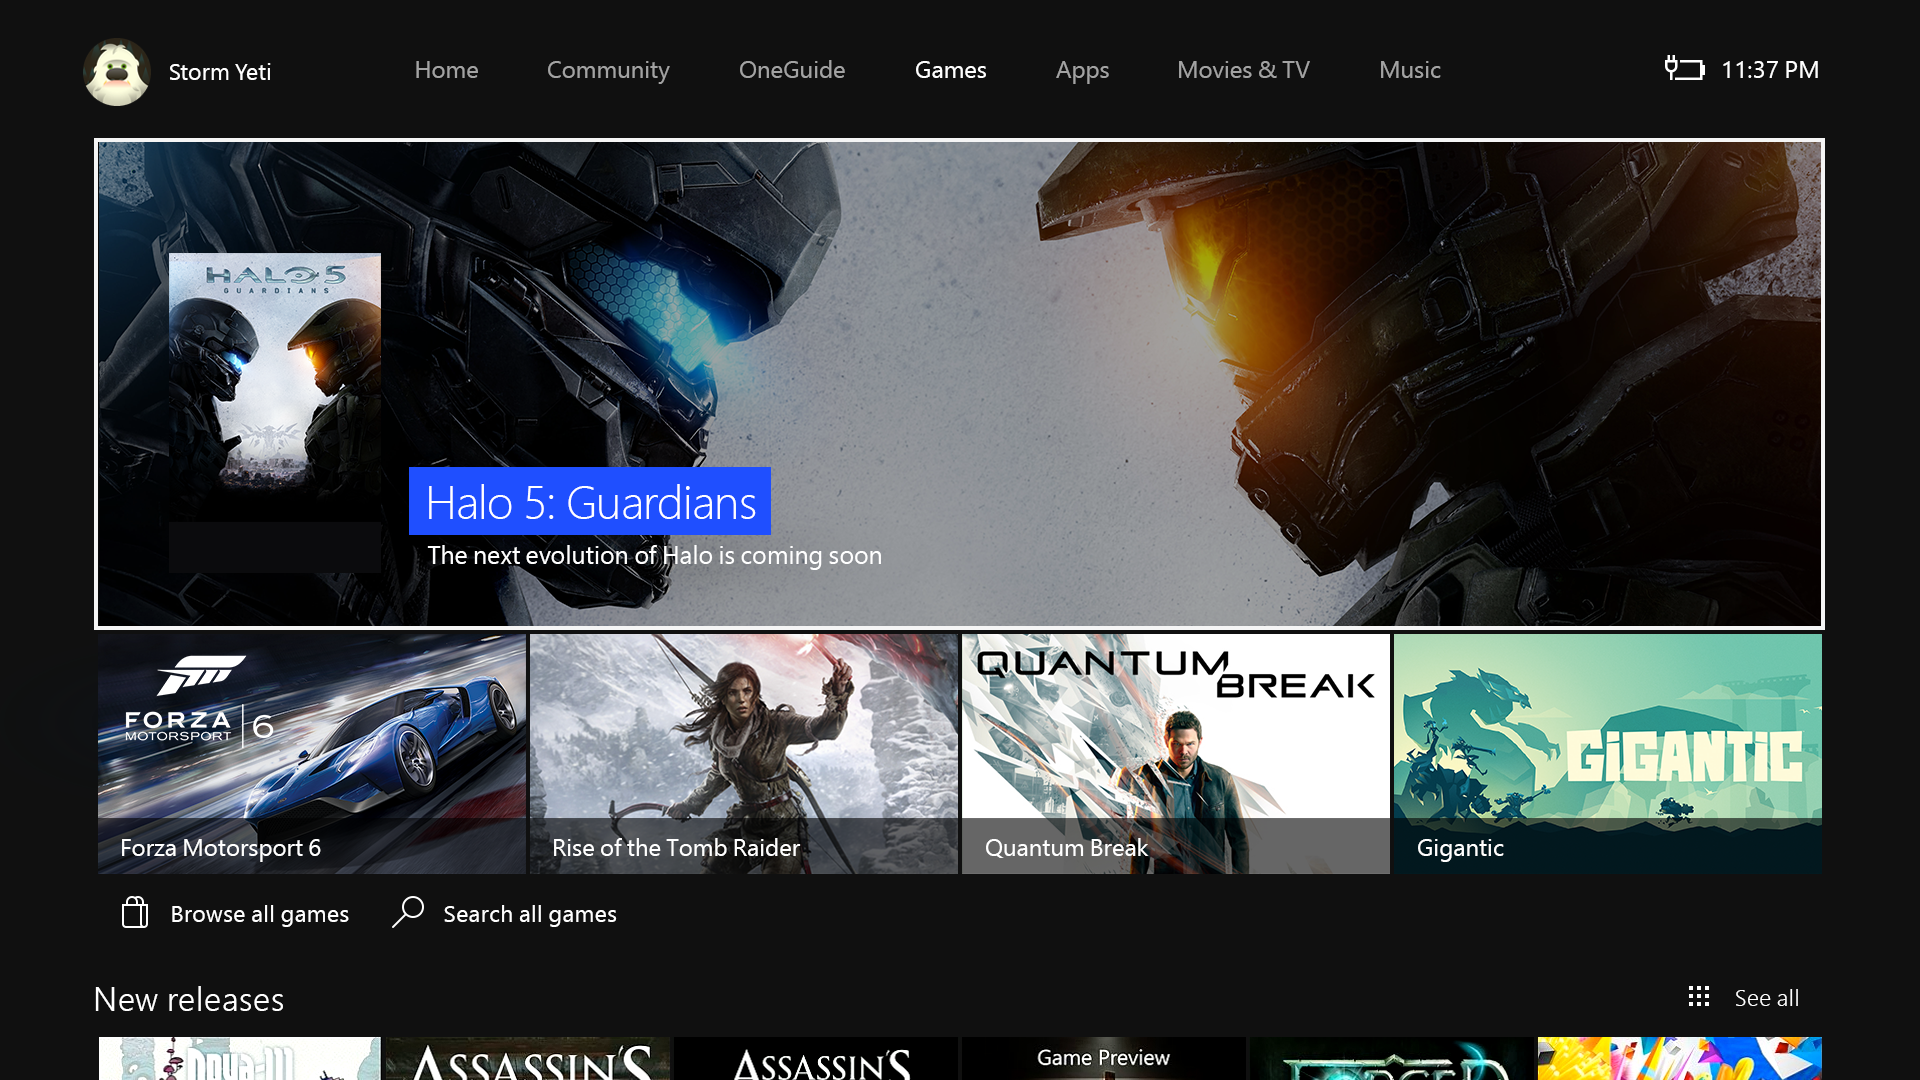 New Xbox One Experience store home featuring Halo 5 Guardians